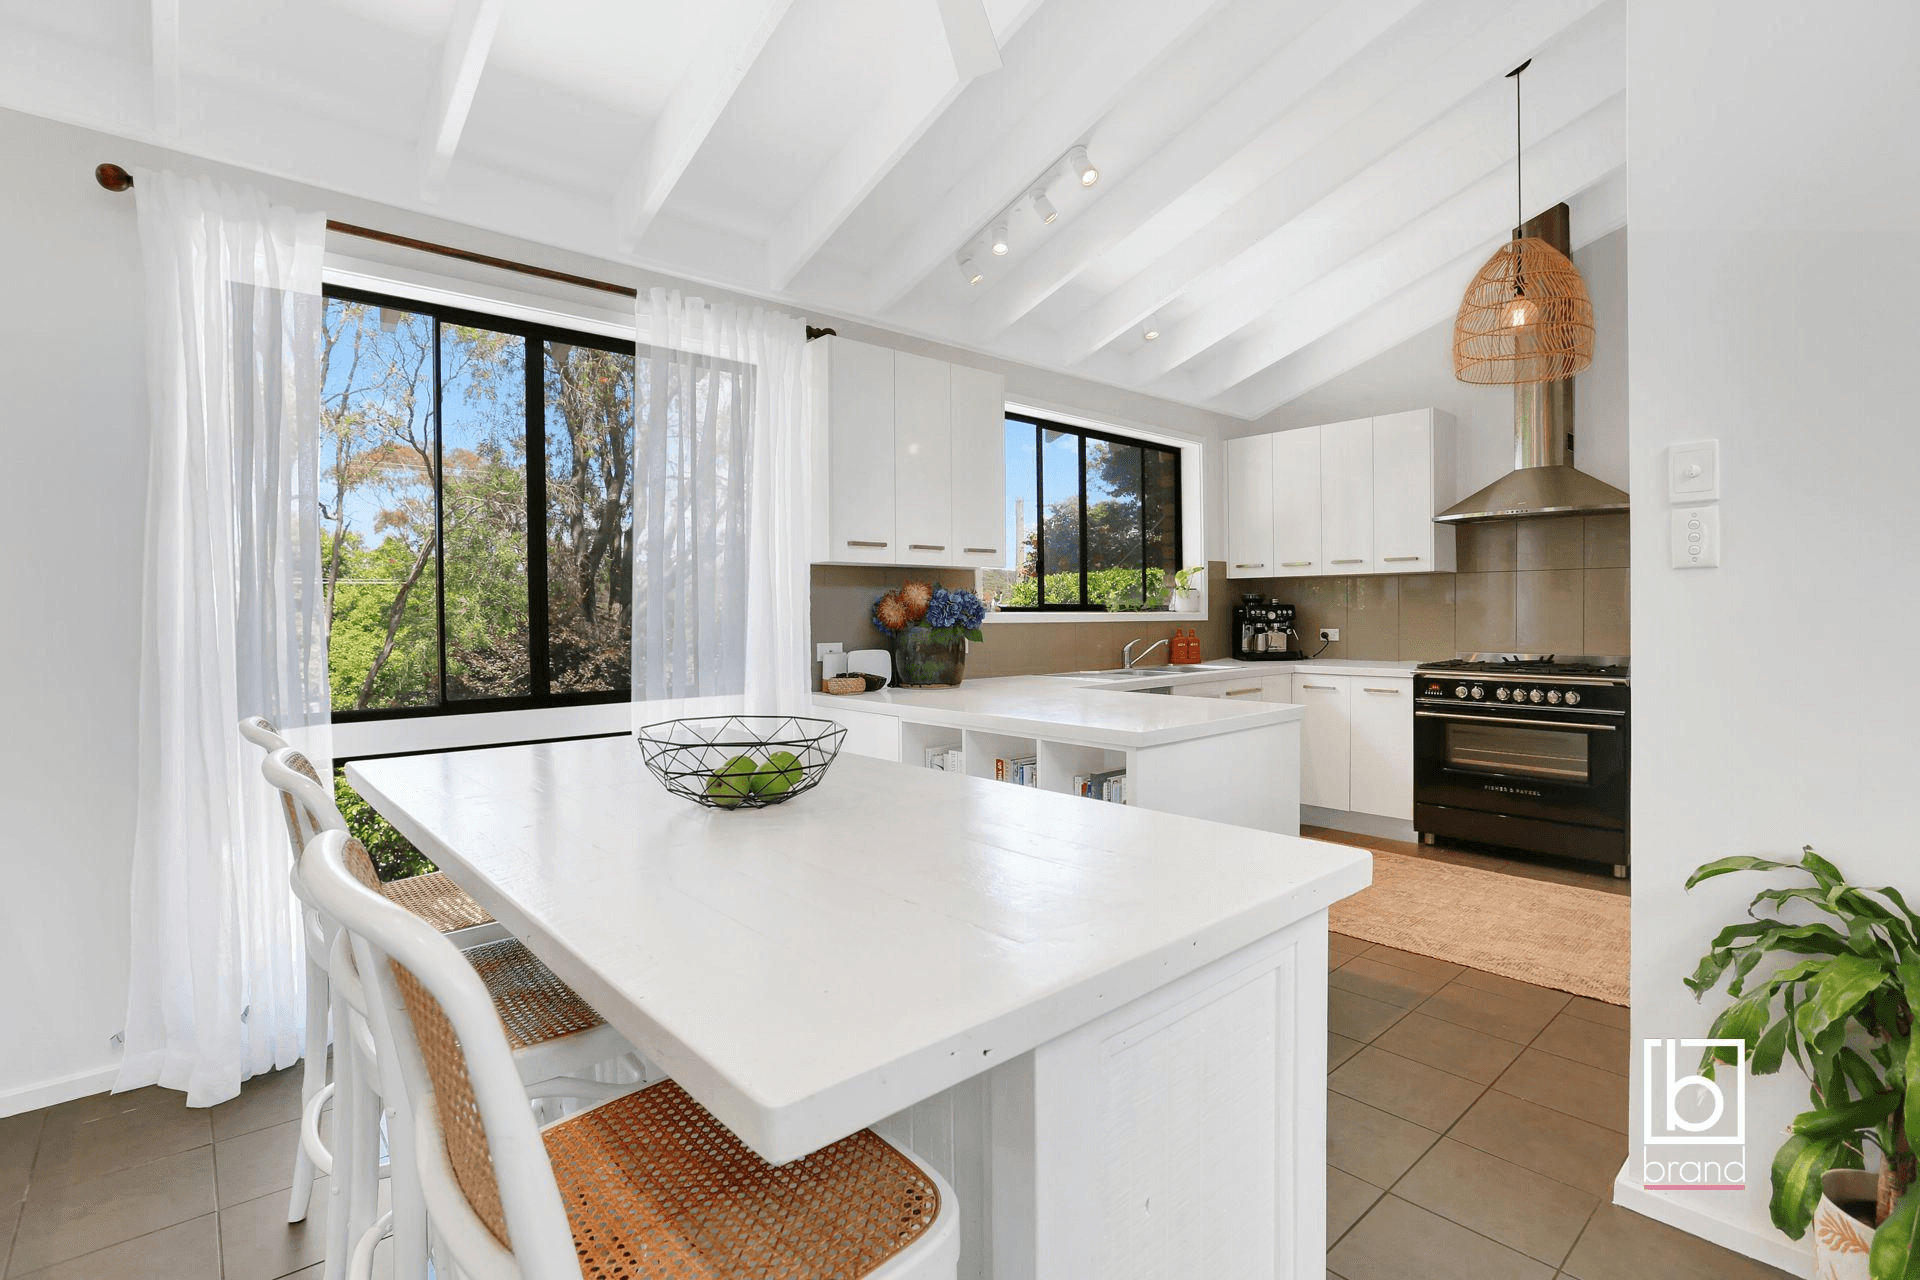 73 Old Gosford Road, WAMBERAL, NSW 2260